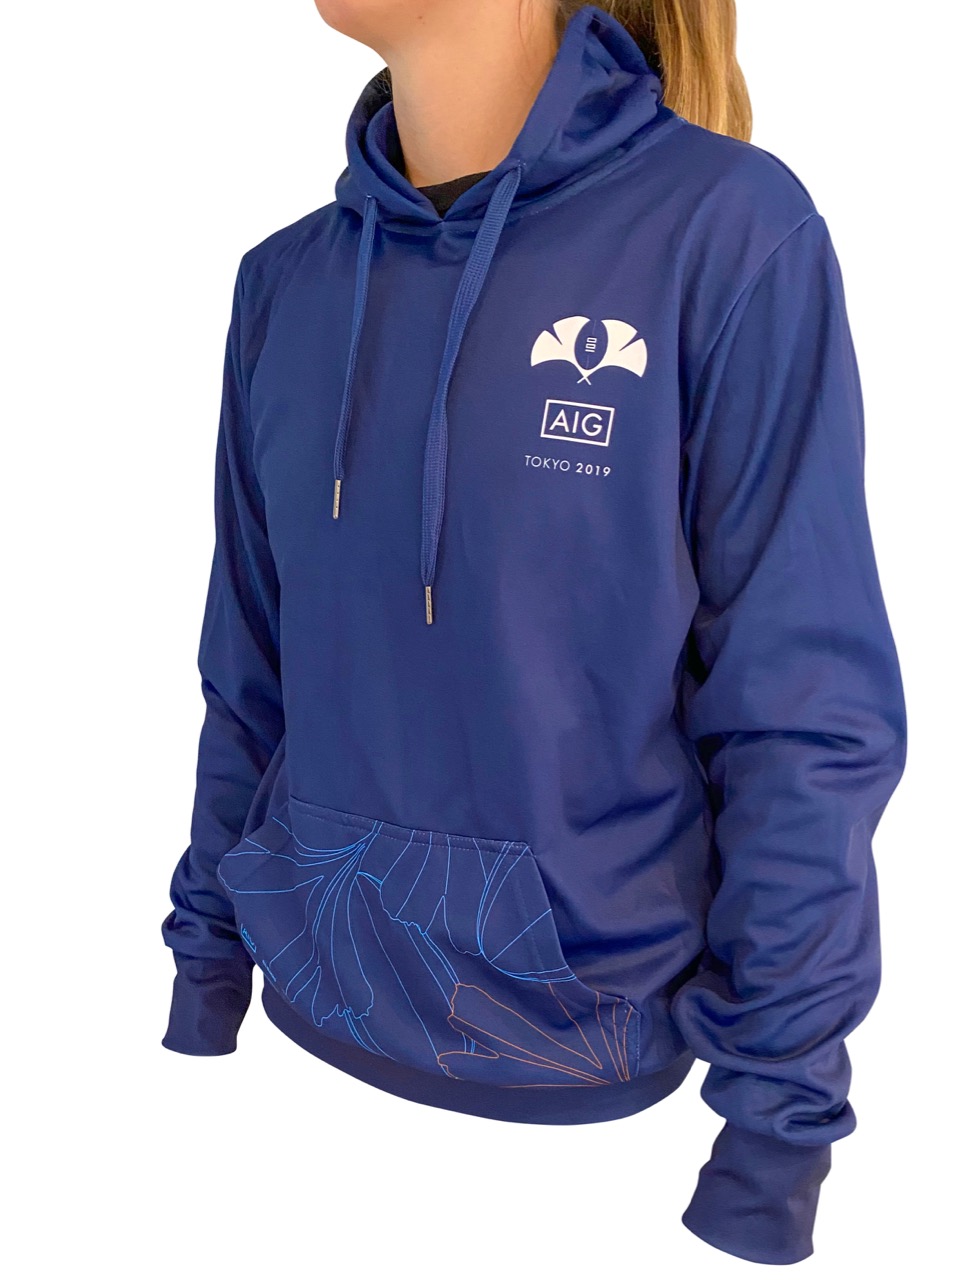 AIG RWC Merch and Apparel Withers and co Hoodie v2